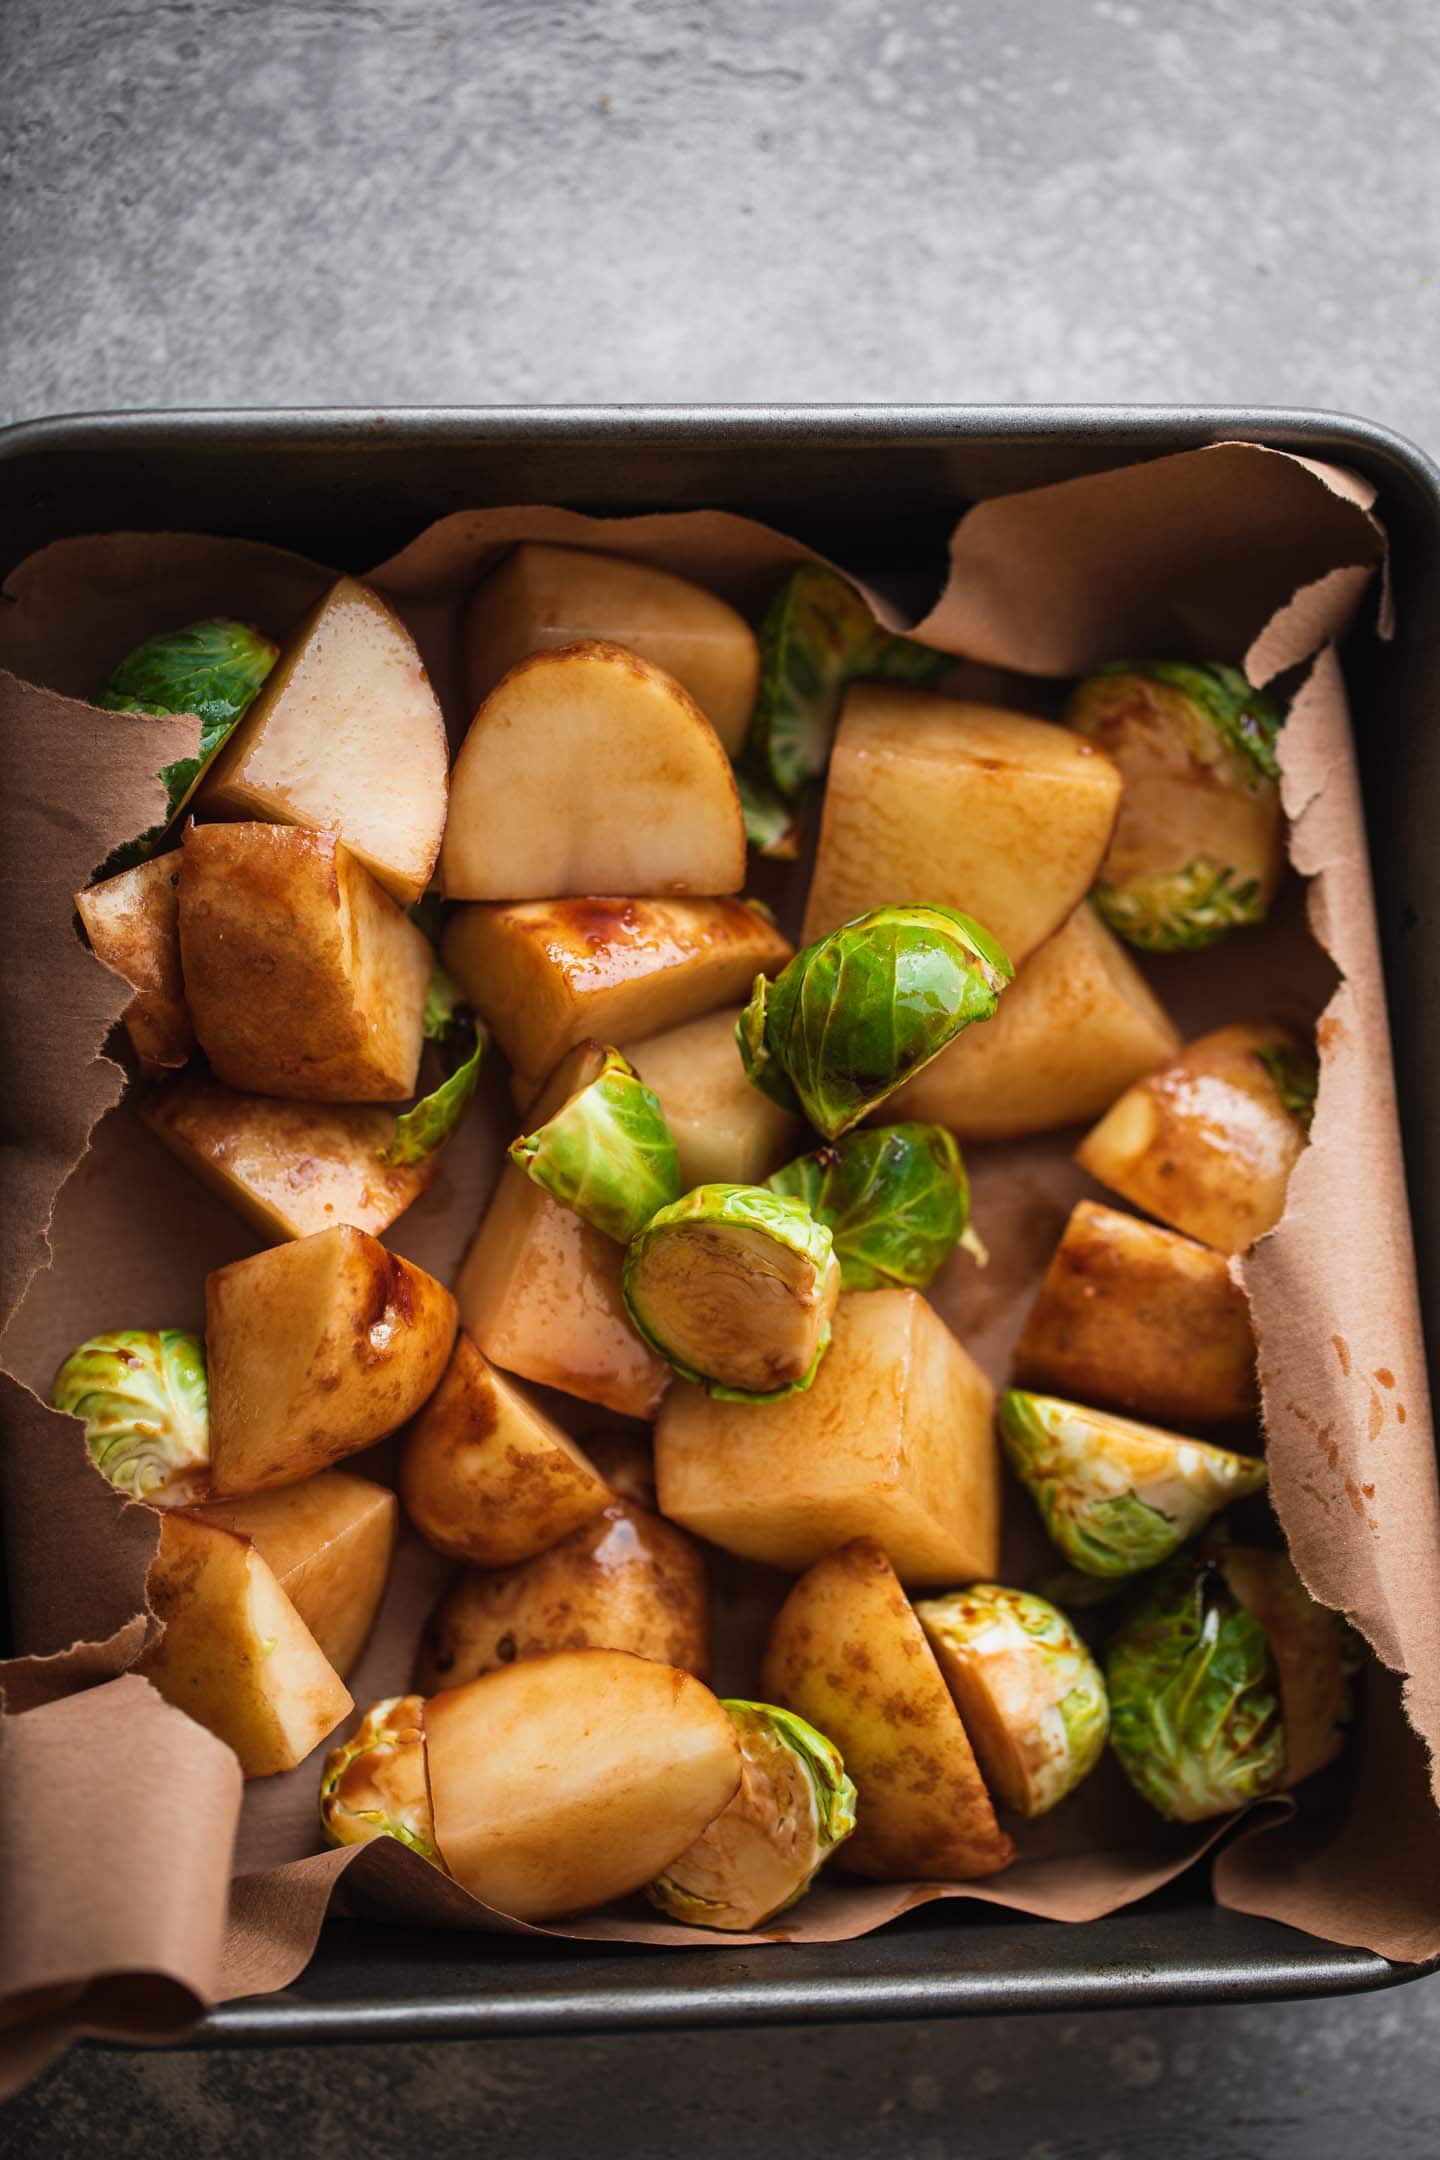 Potatoes and Brussels sprouts in a baking tin